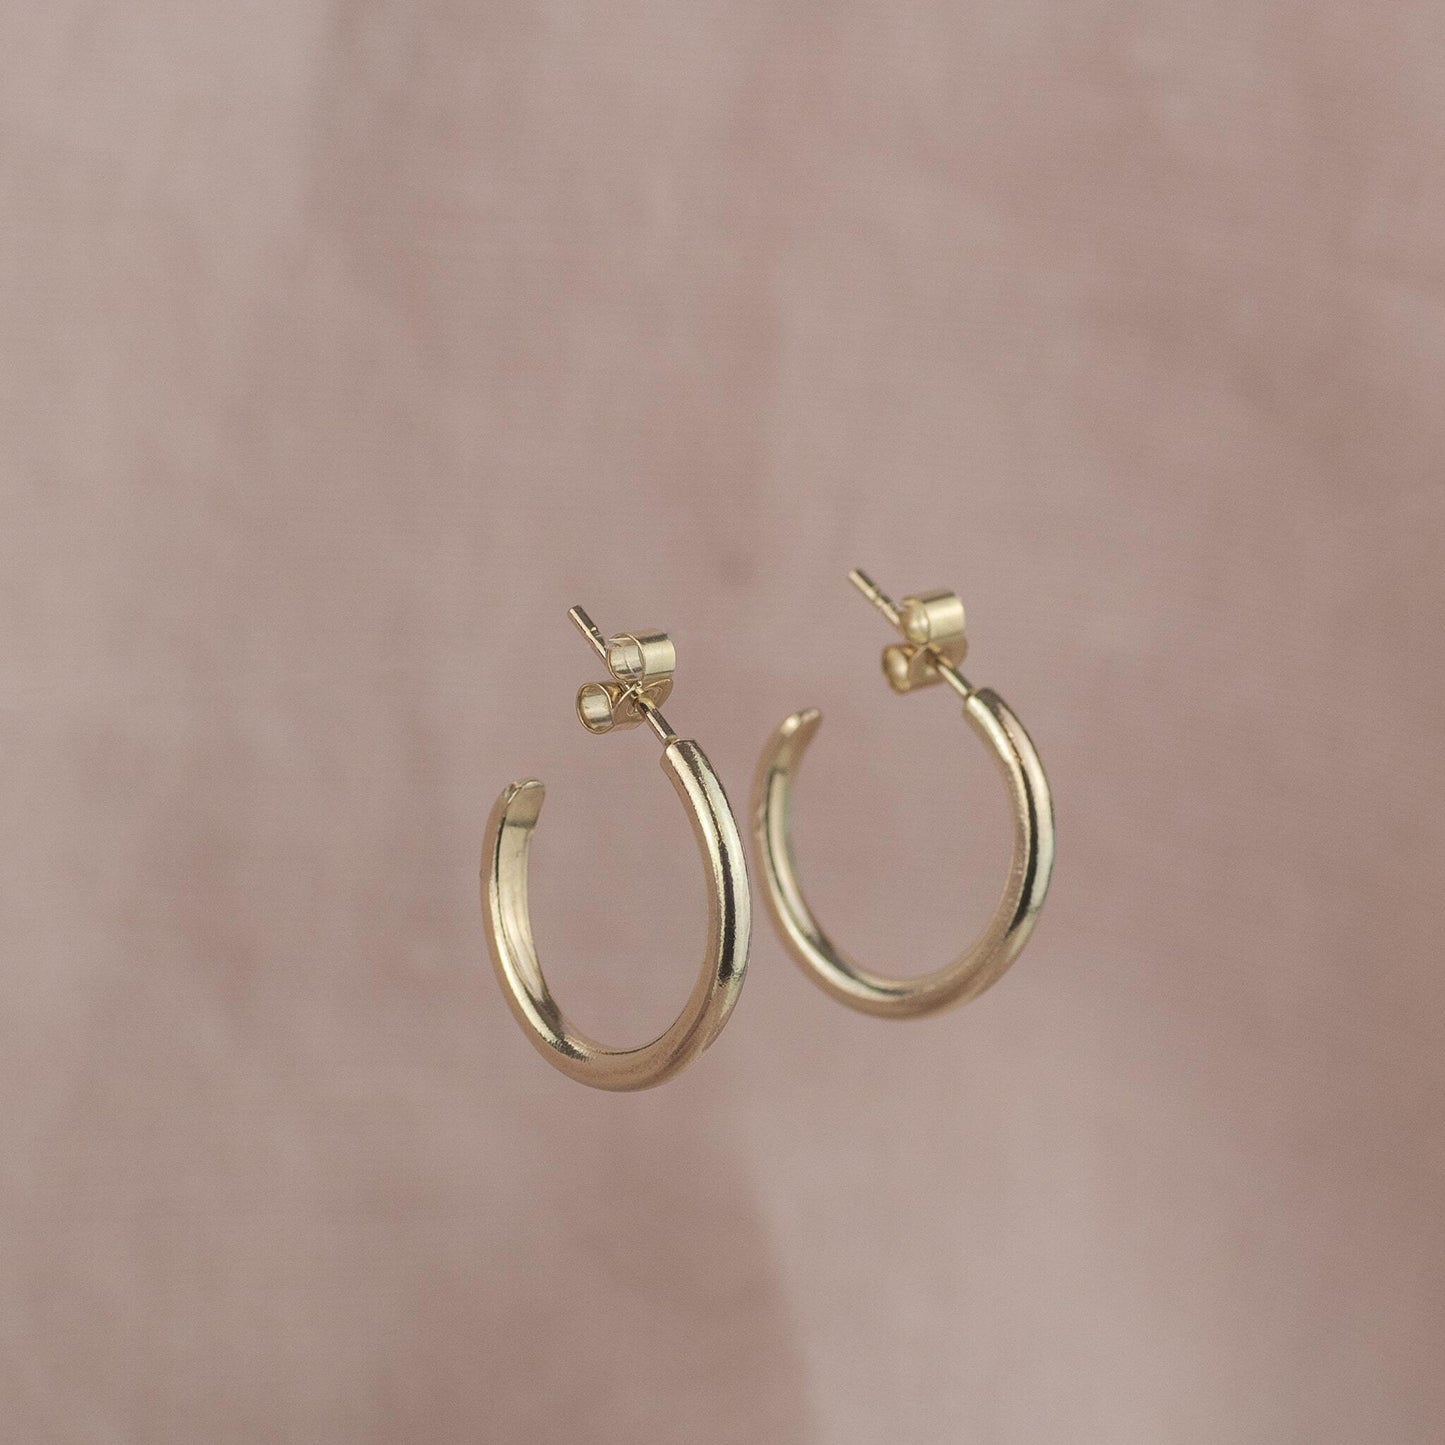 9kt Gold Extra Petite Hoops - 1.5cm